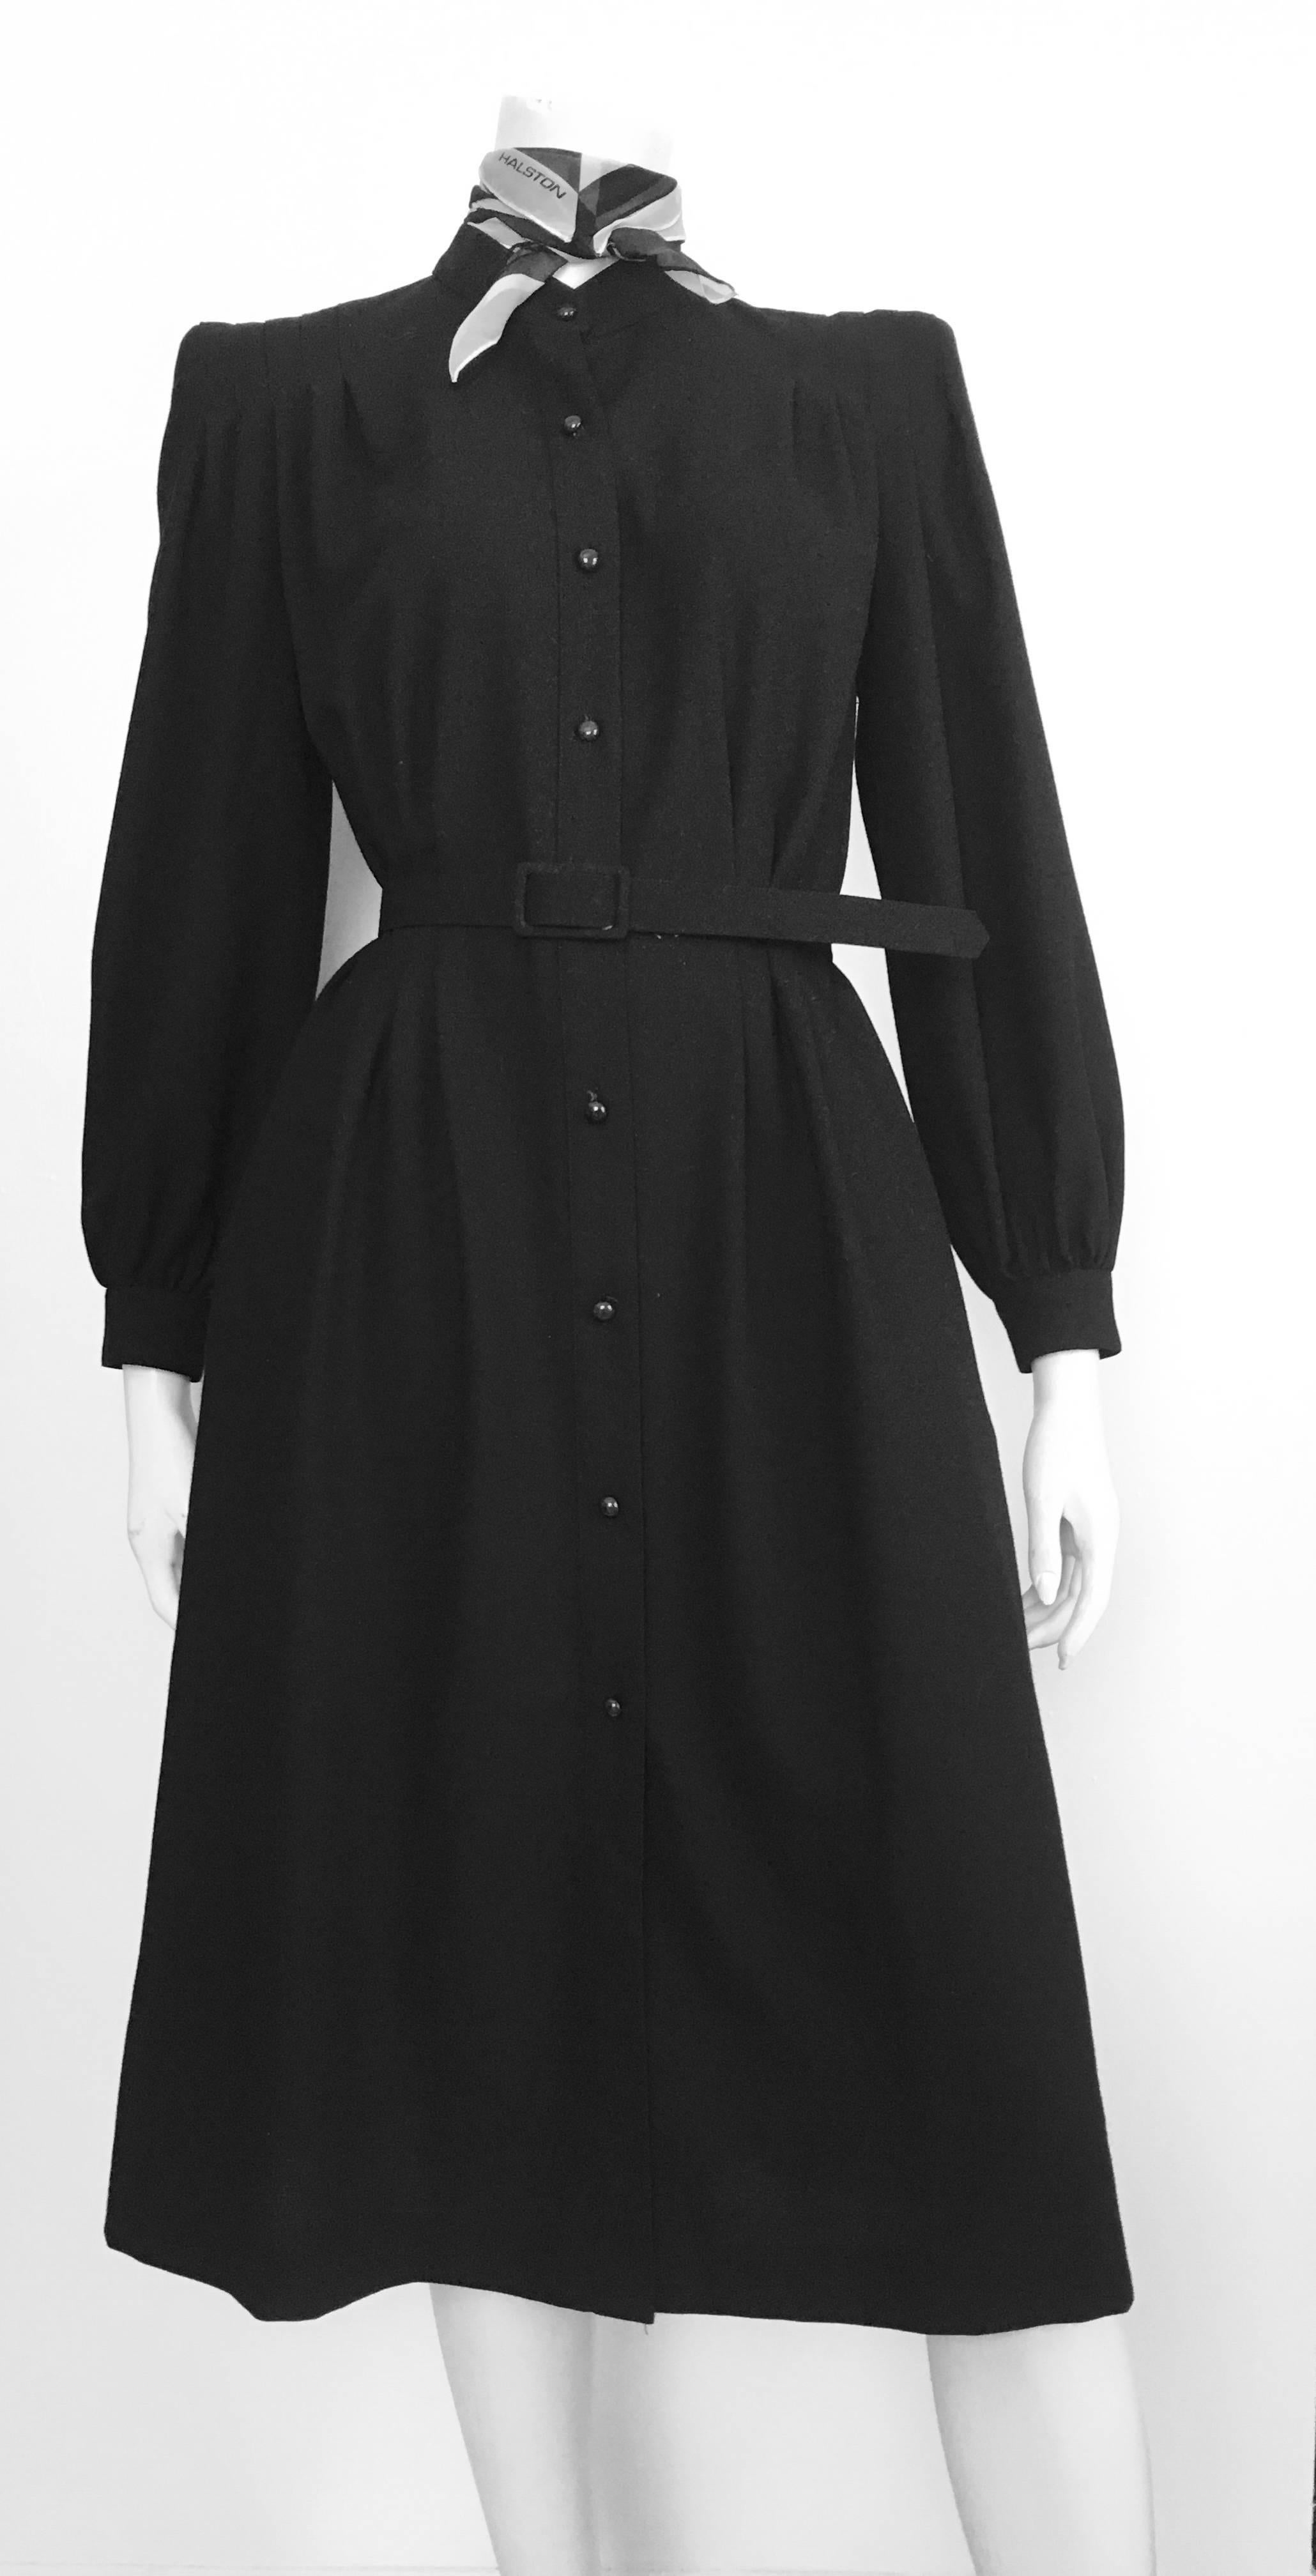 Pierre Cardin 1980s black wool button up dress with pockets & belt is labeled a size 10 but fits like a modern 6/8. The waist is 30.1/2